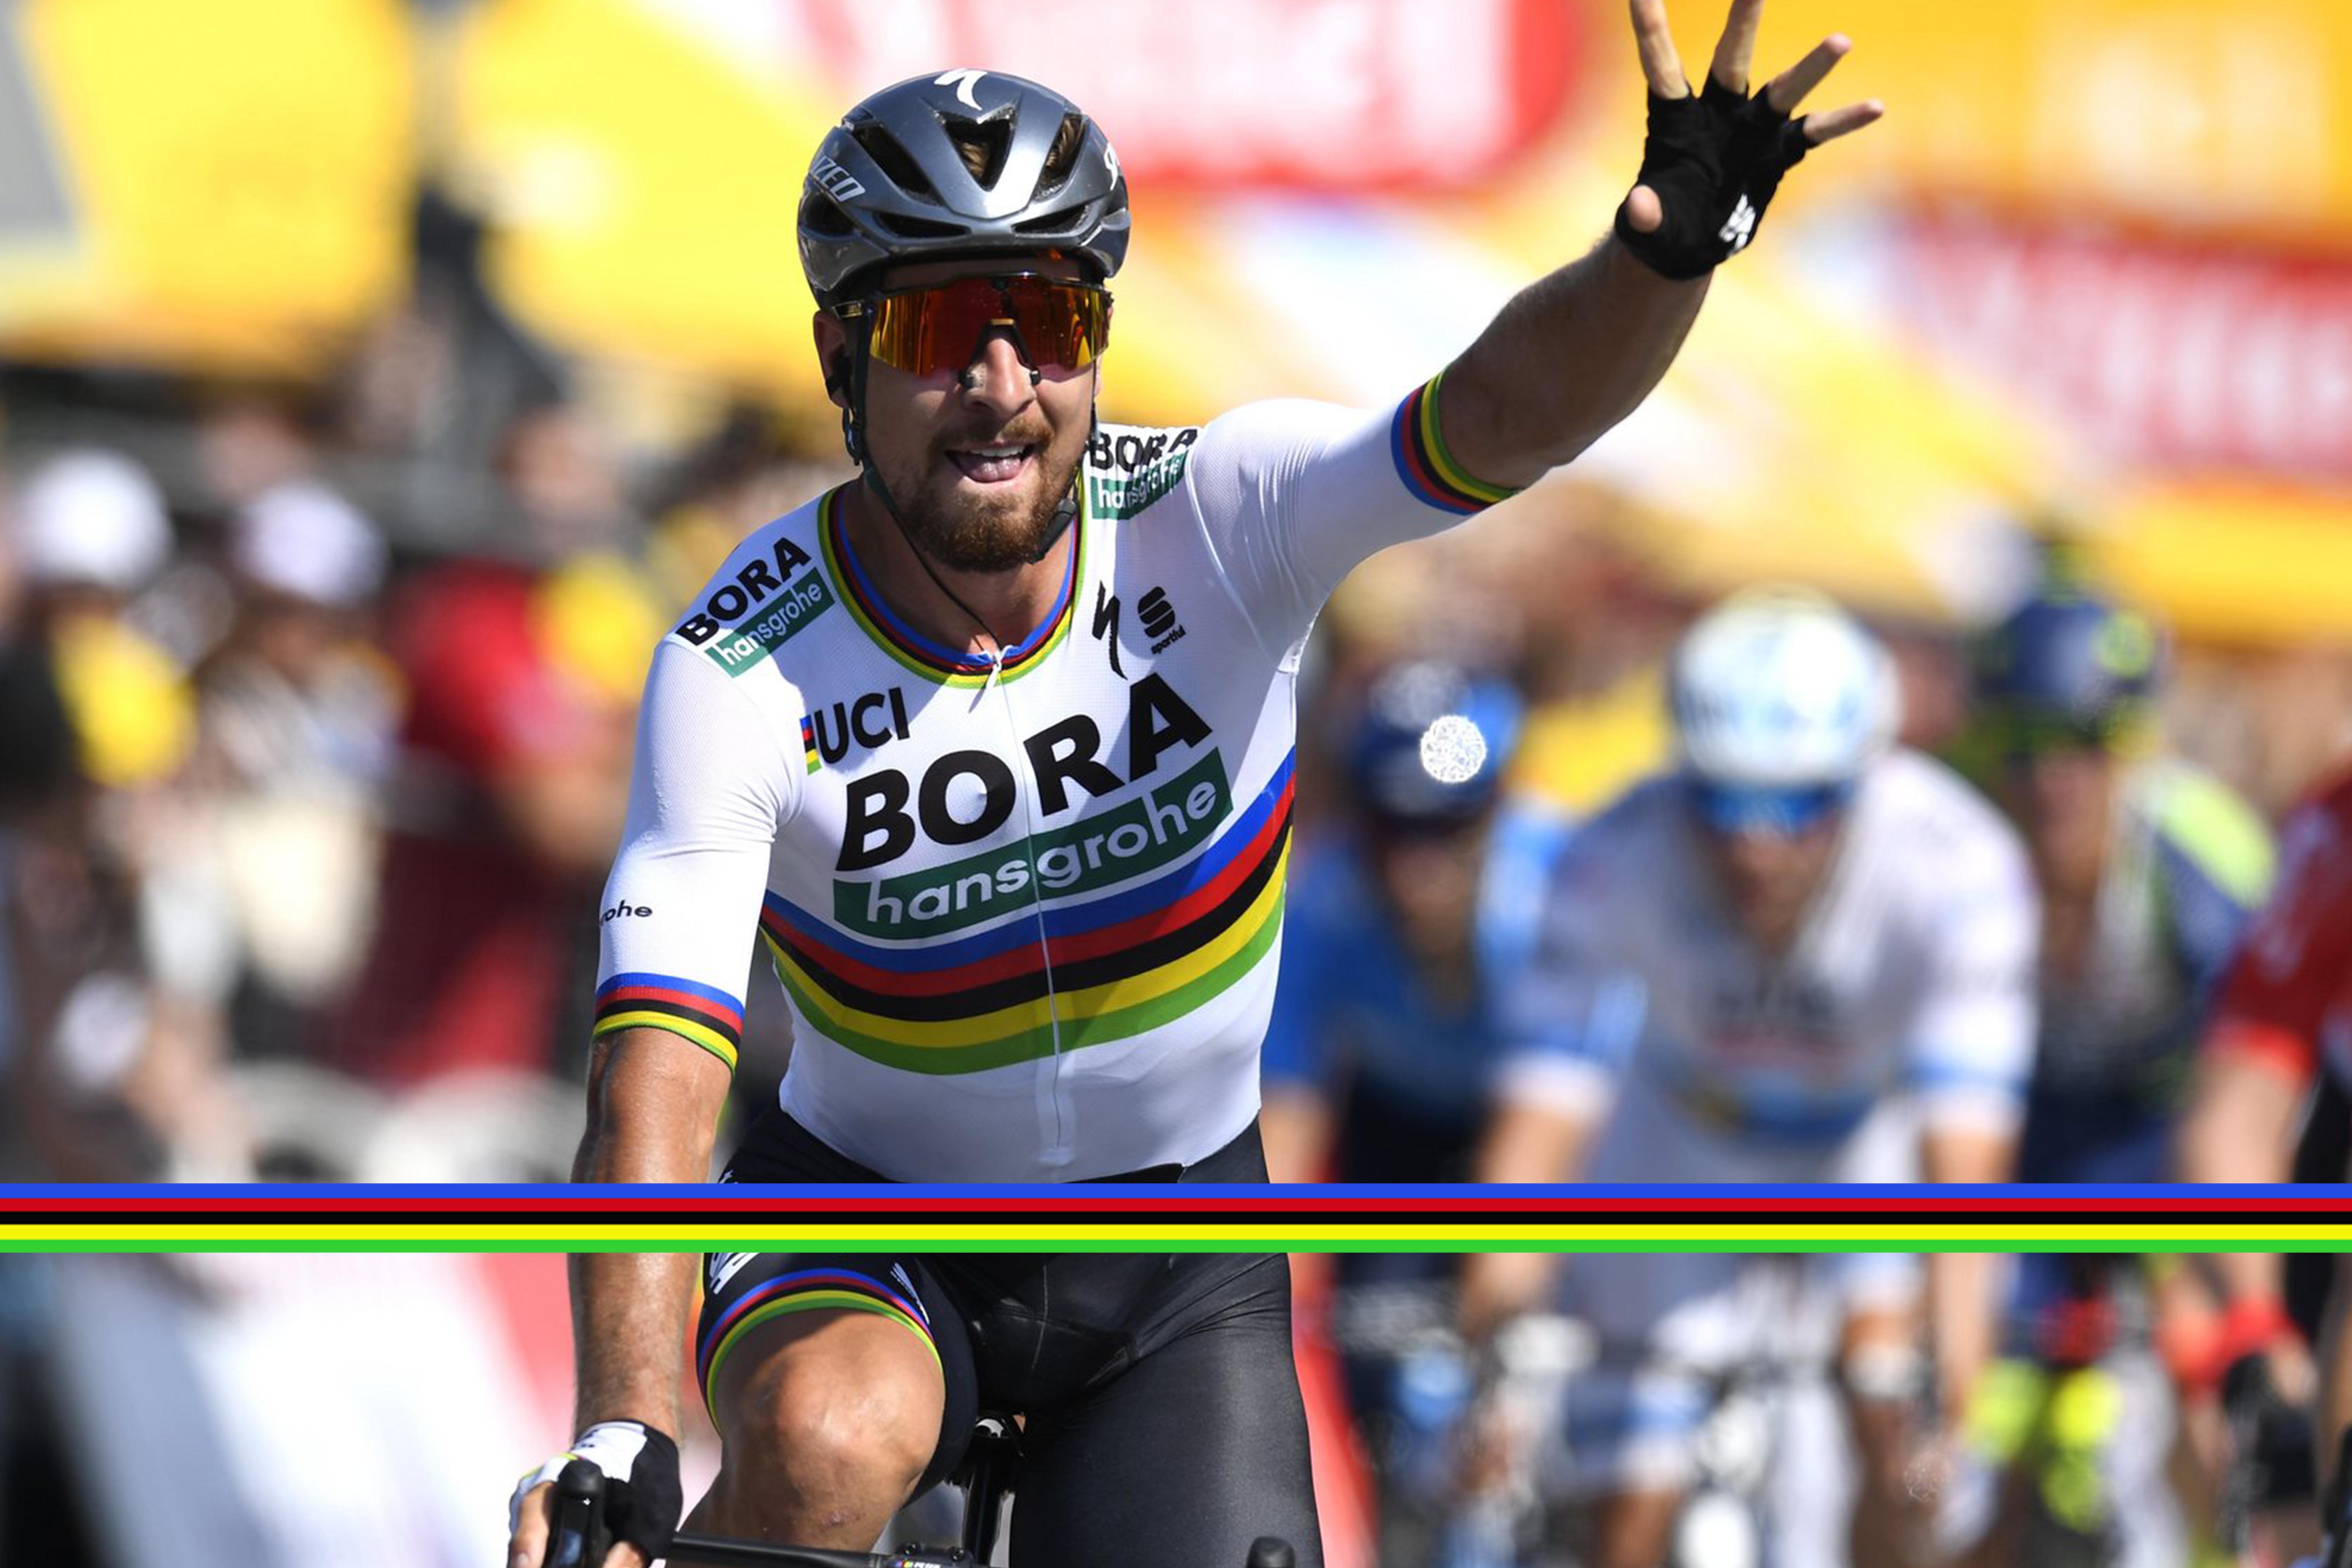 Reversing the Curse: 5 world champions who've shone in the rainbow jersey